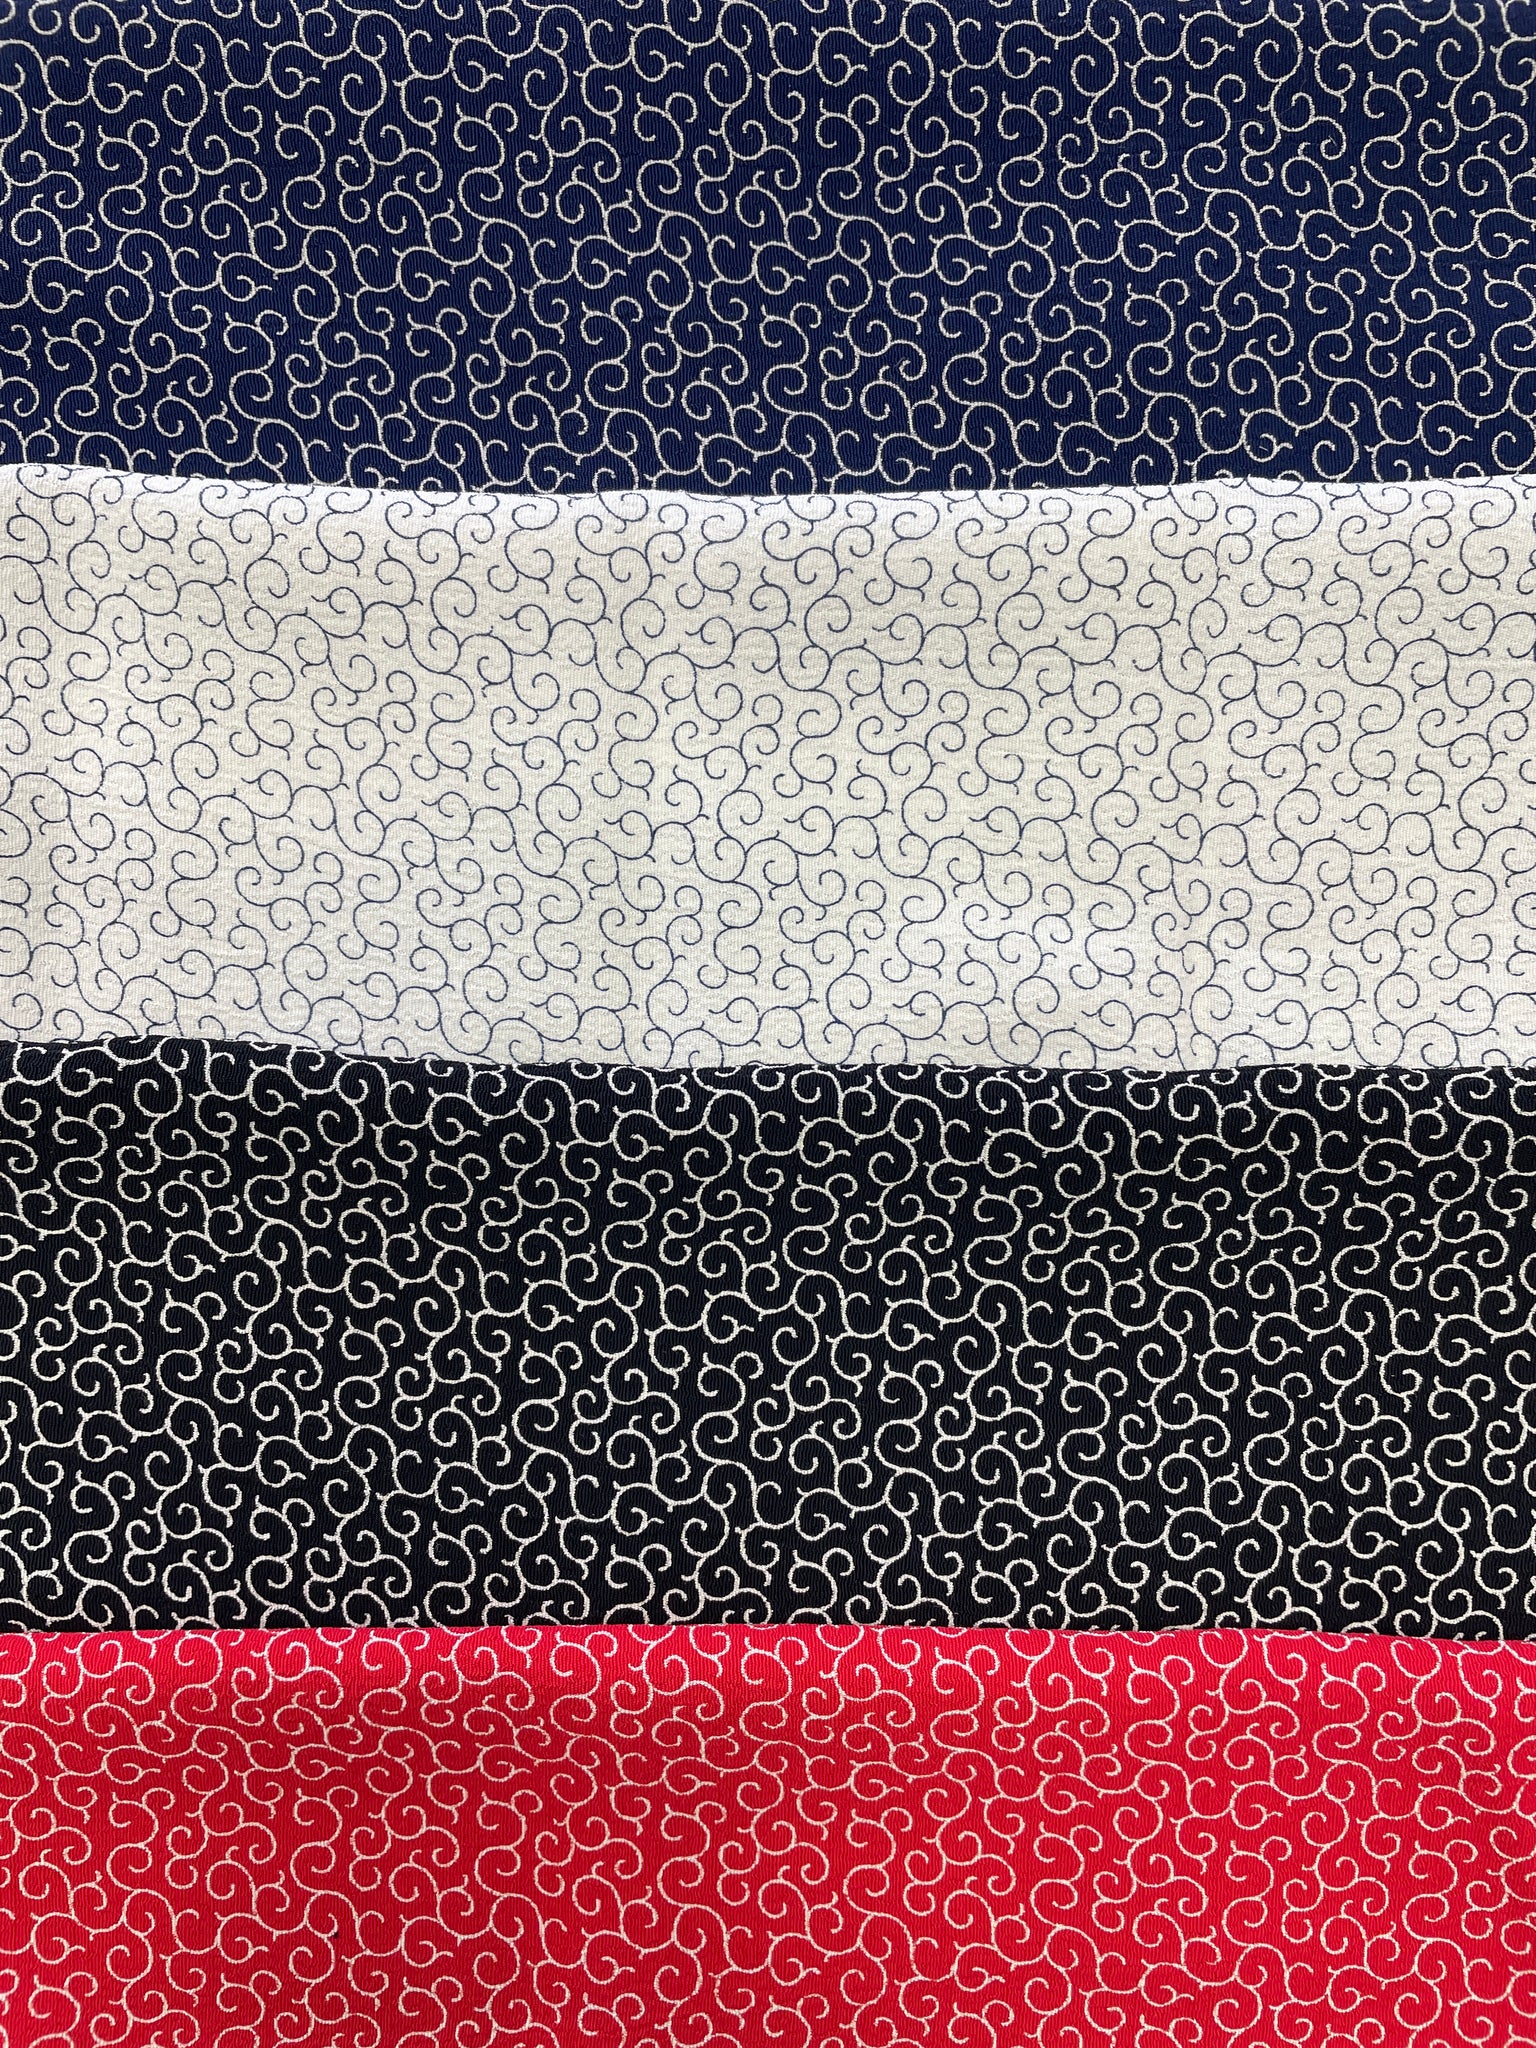 Viscose Crepe Swatch Bundle Vintage - Navy Blue, Red, White and Black with Swirls